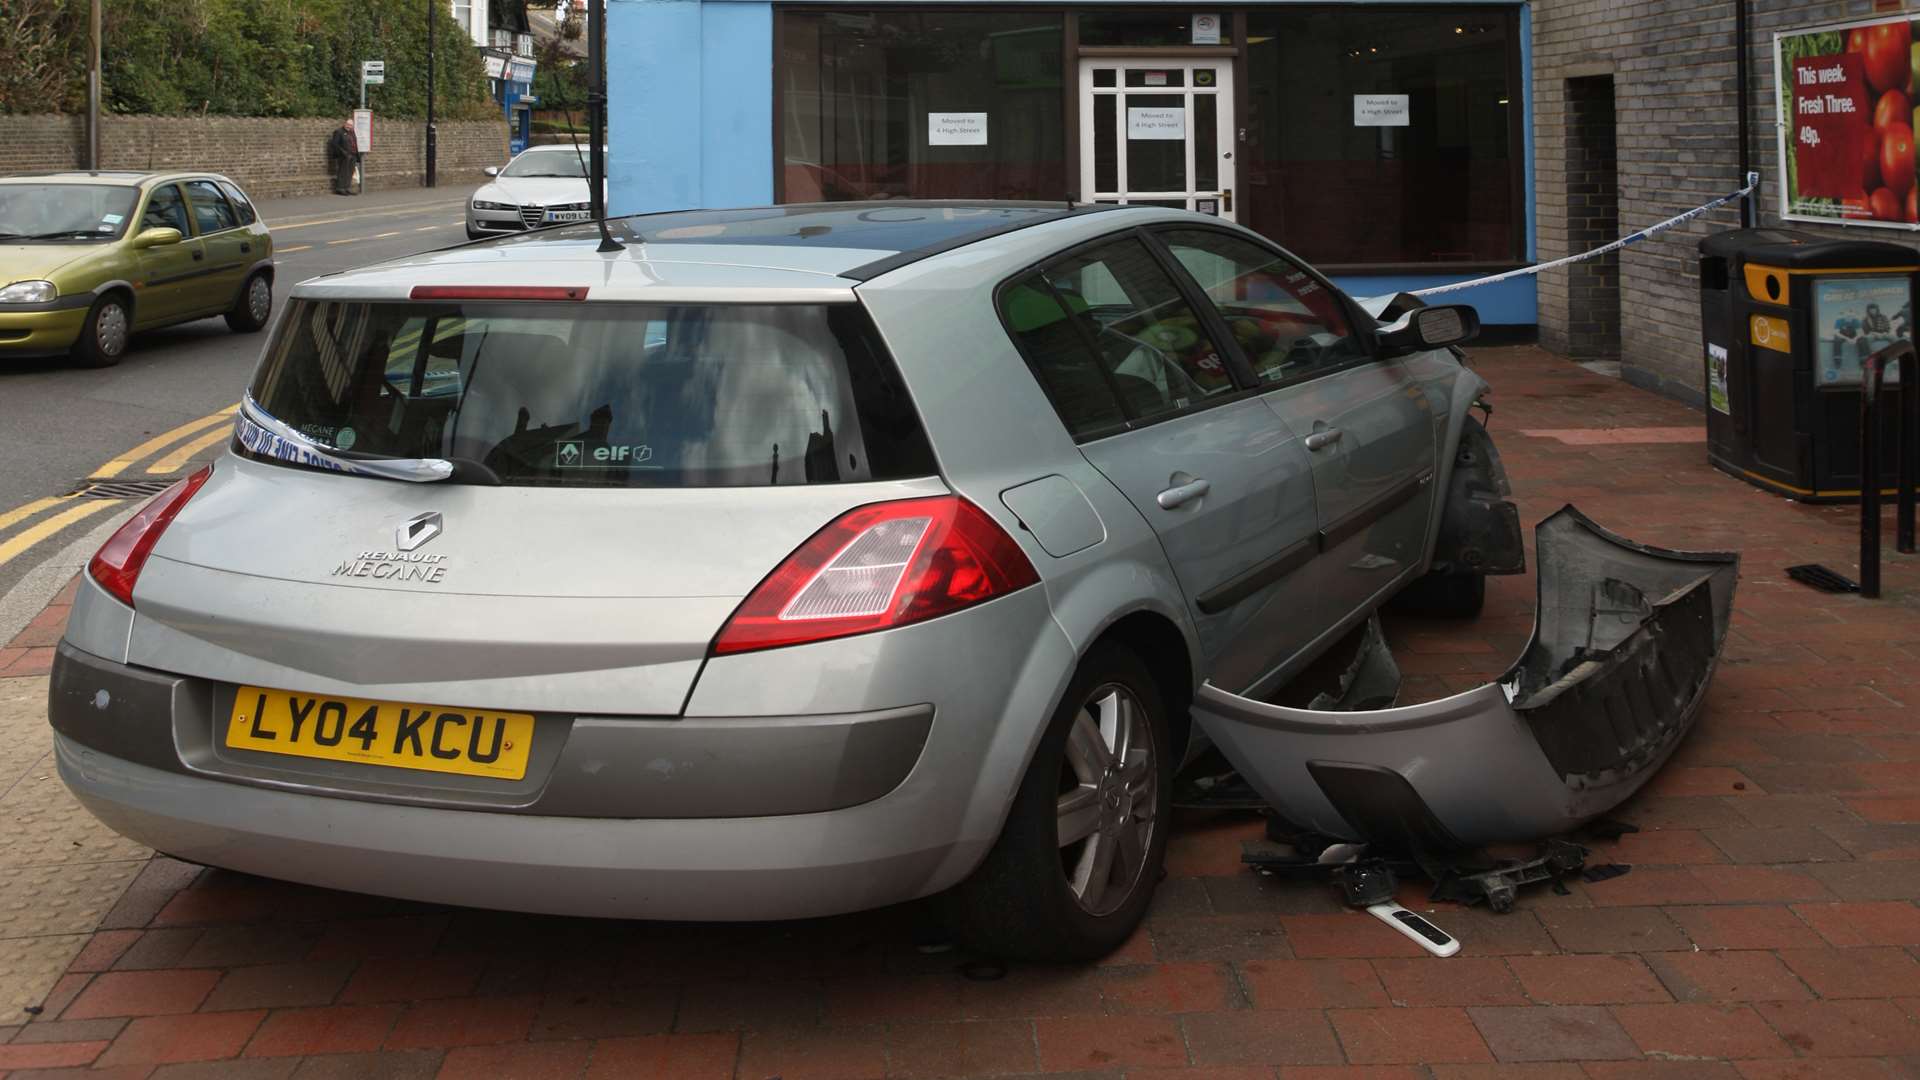 The two-car crash happened near shops in Snodland. Picture: John Westhrop